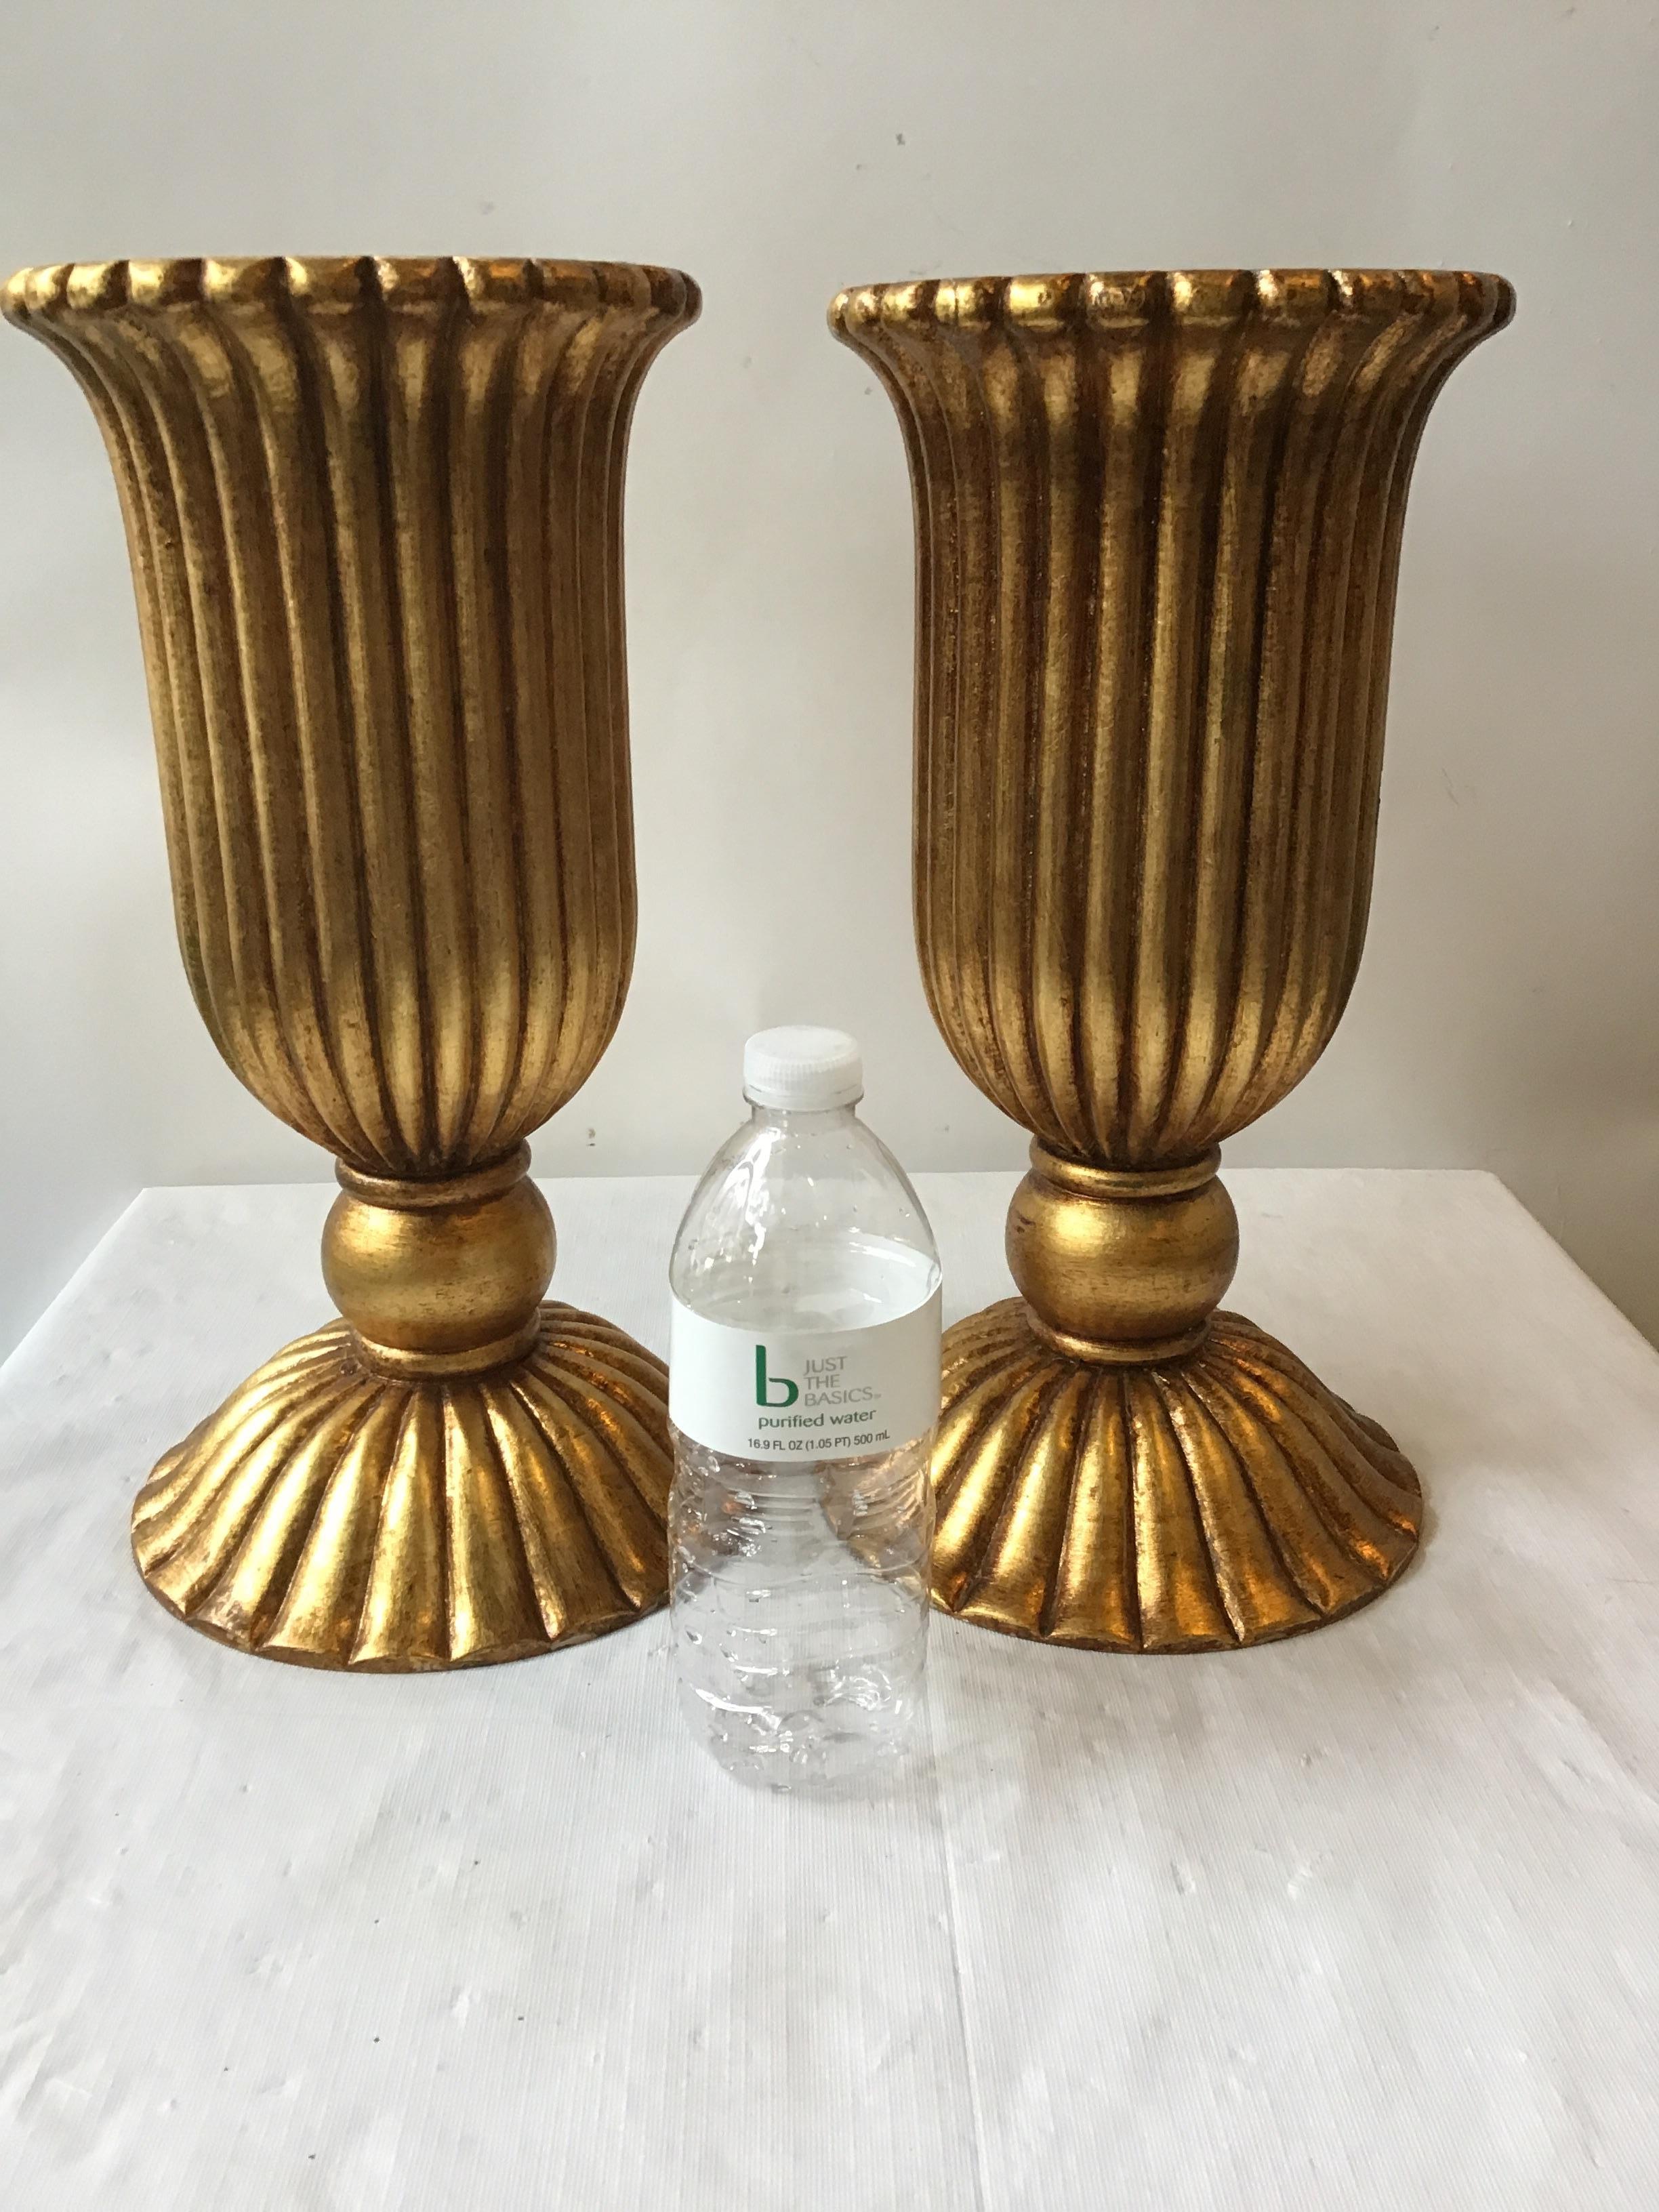 Pair of 1960s giltwood urn shaped lamp bases. Can also be used for table bases. Marked Italy on bottom.